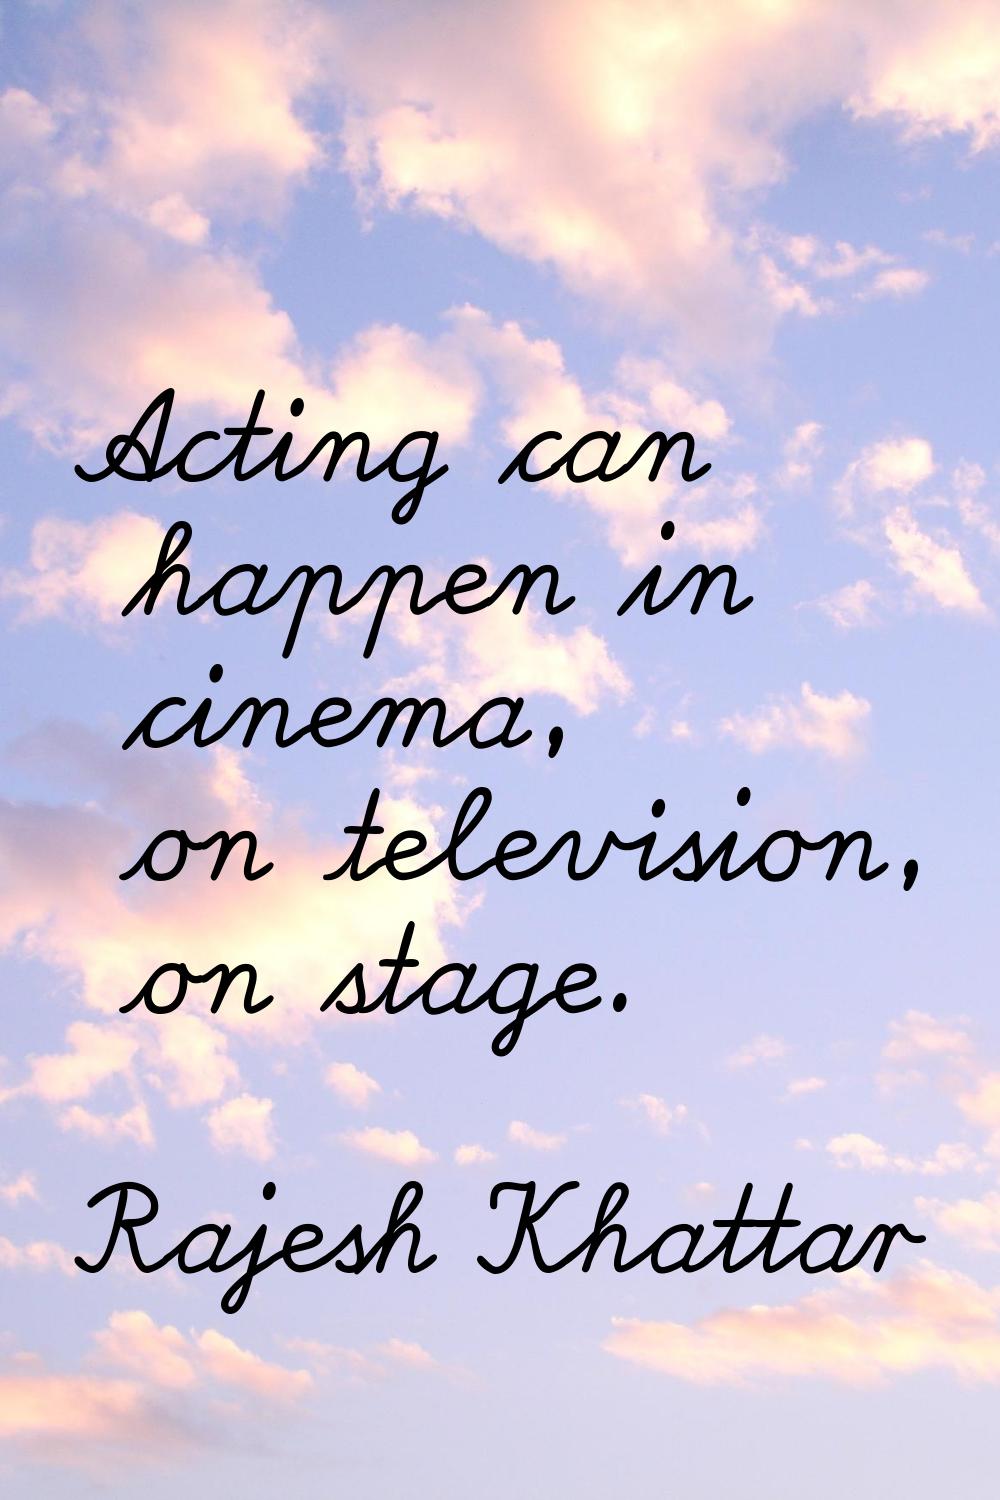 Acting can happen in cinema, on television, on stage.